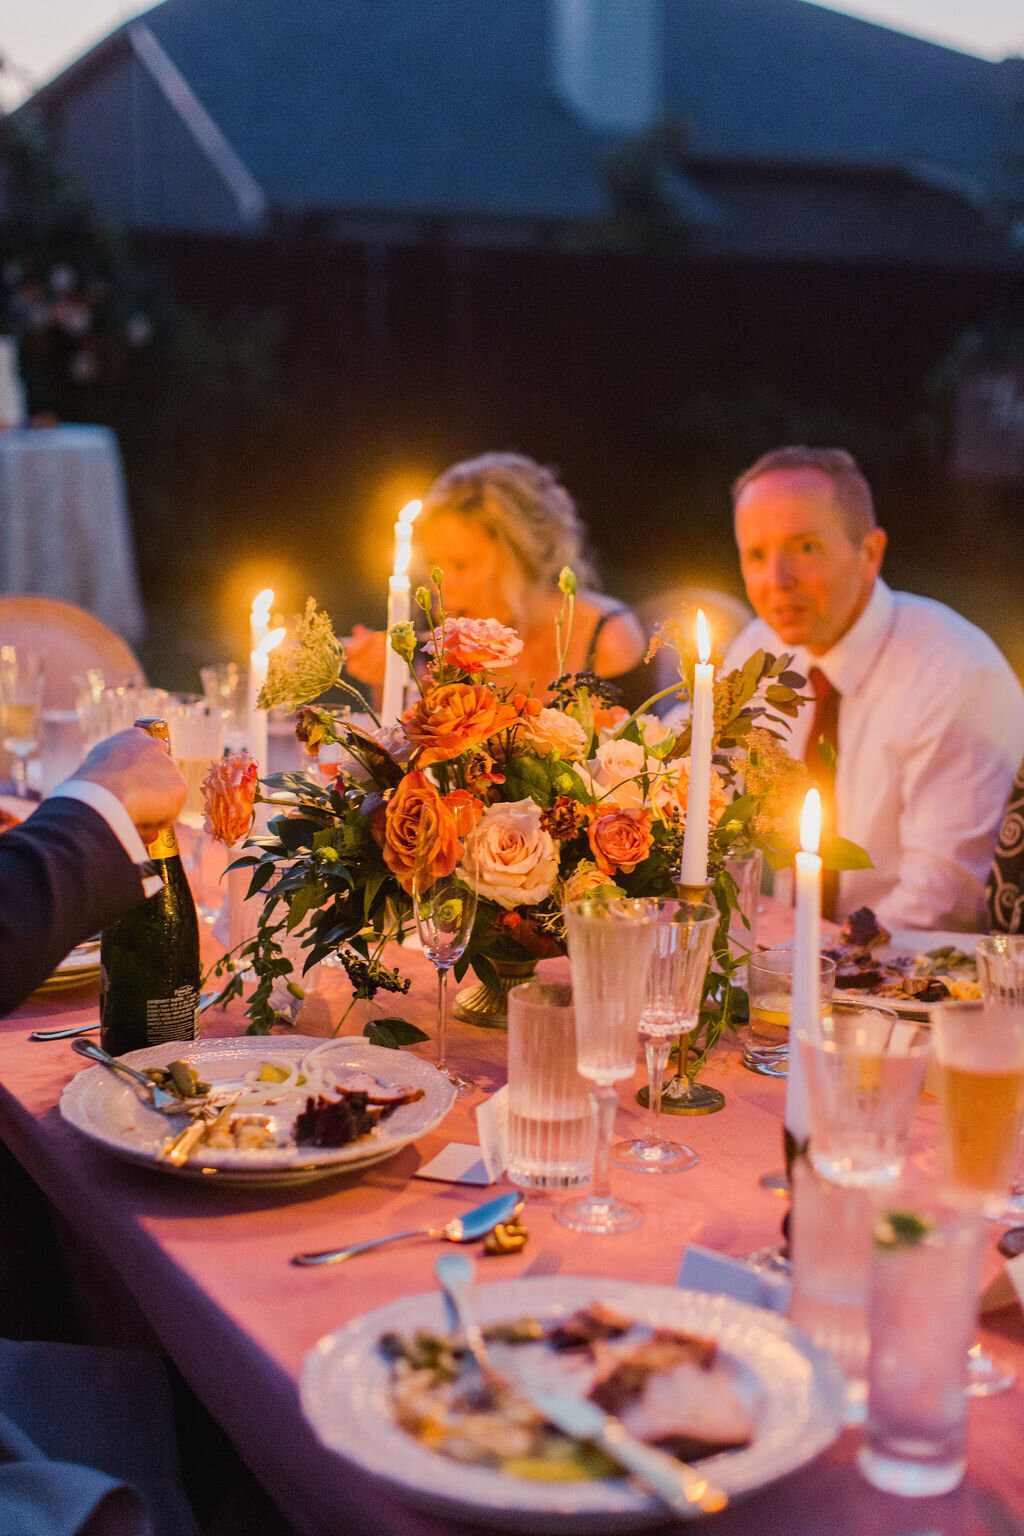 Candlelight intimate wedding reception with wedding florals by Vella Nest Floral Design